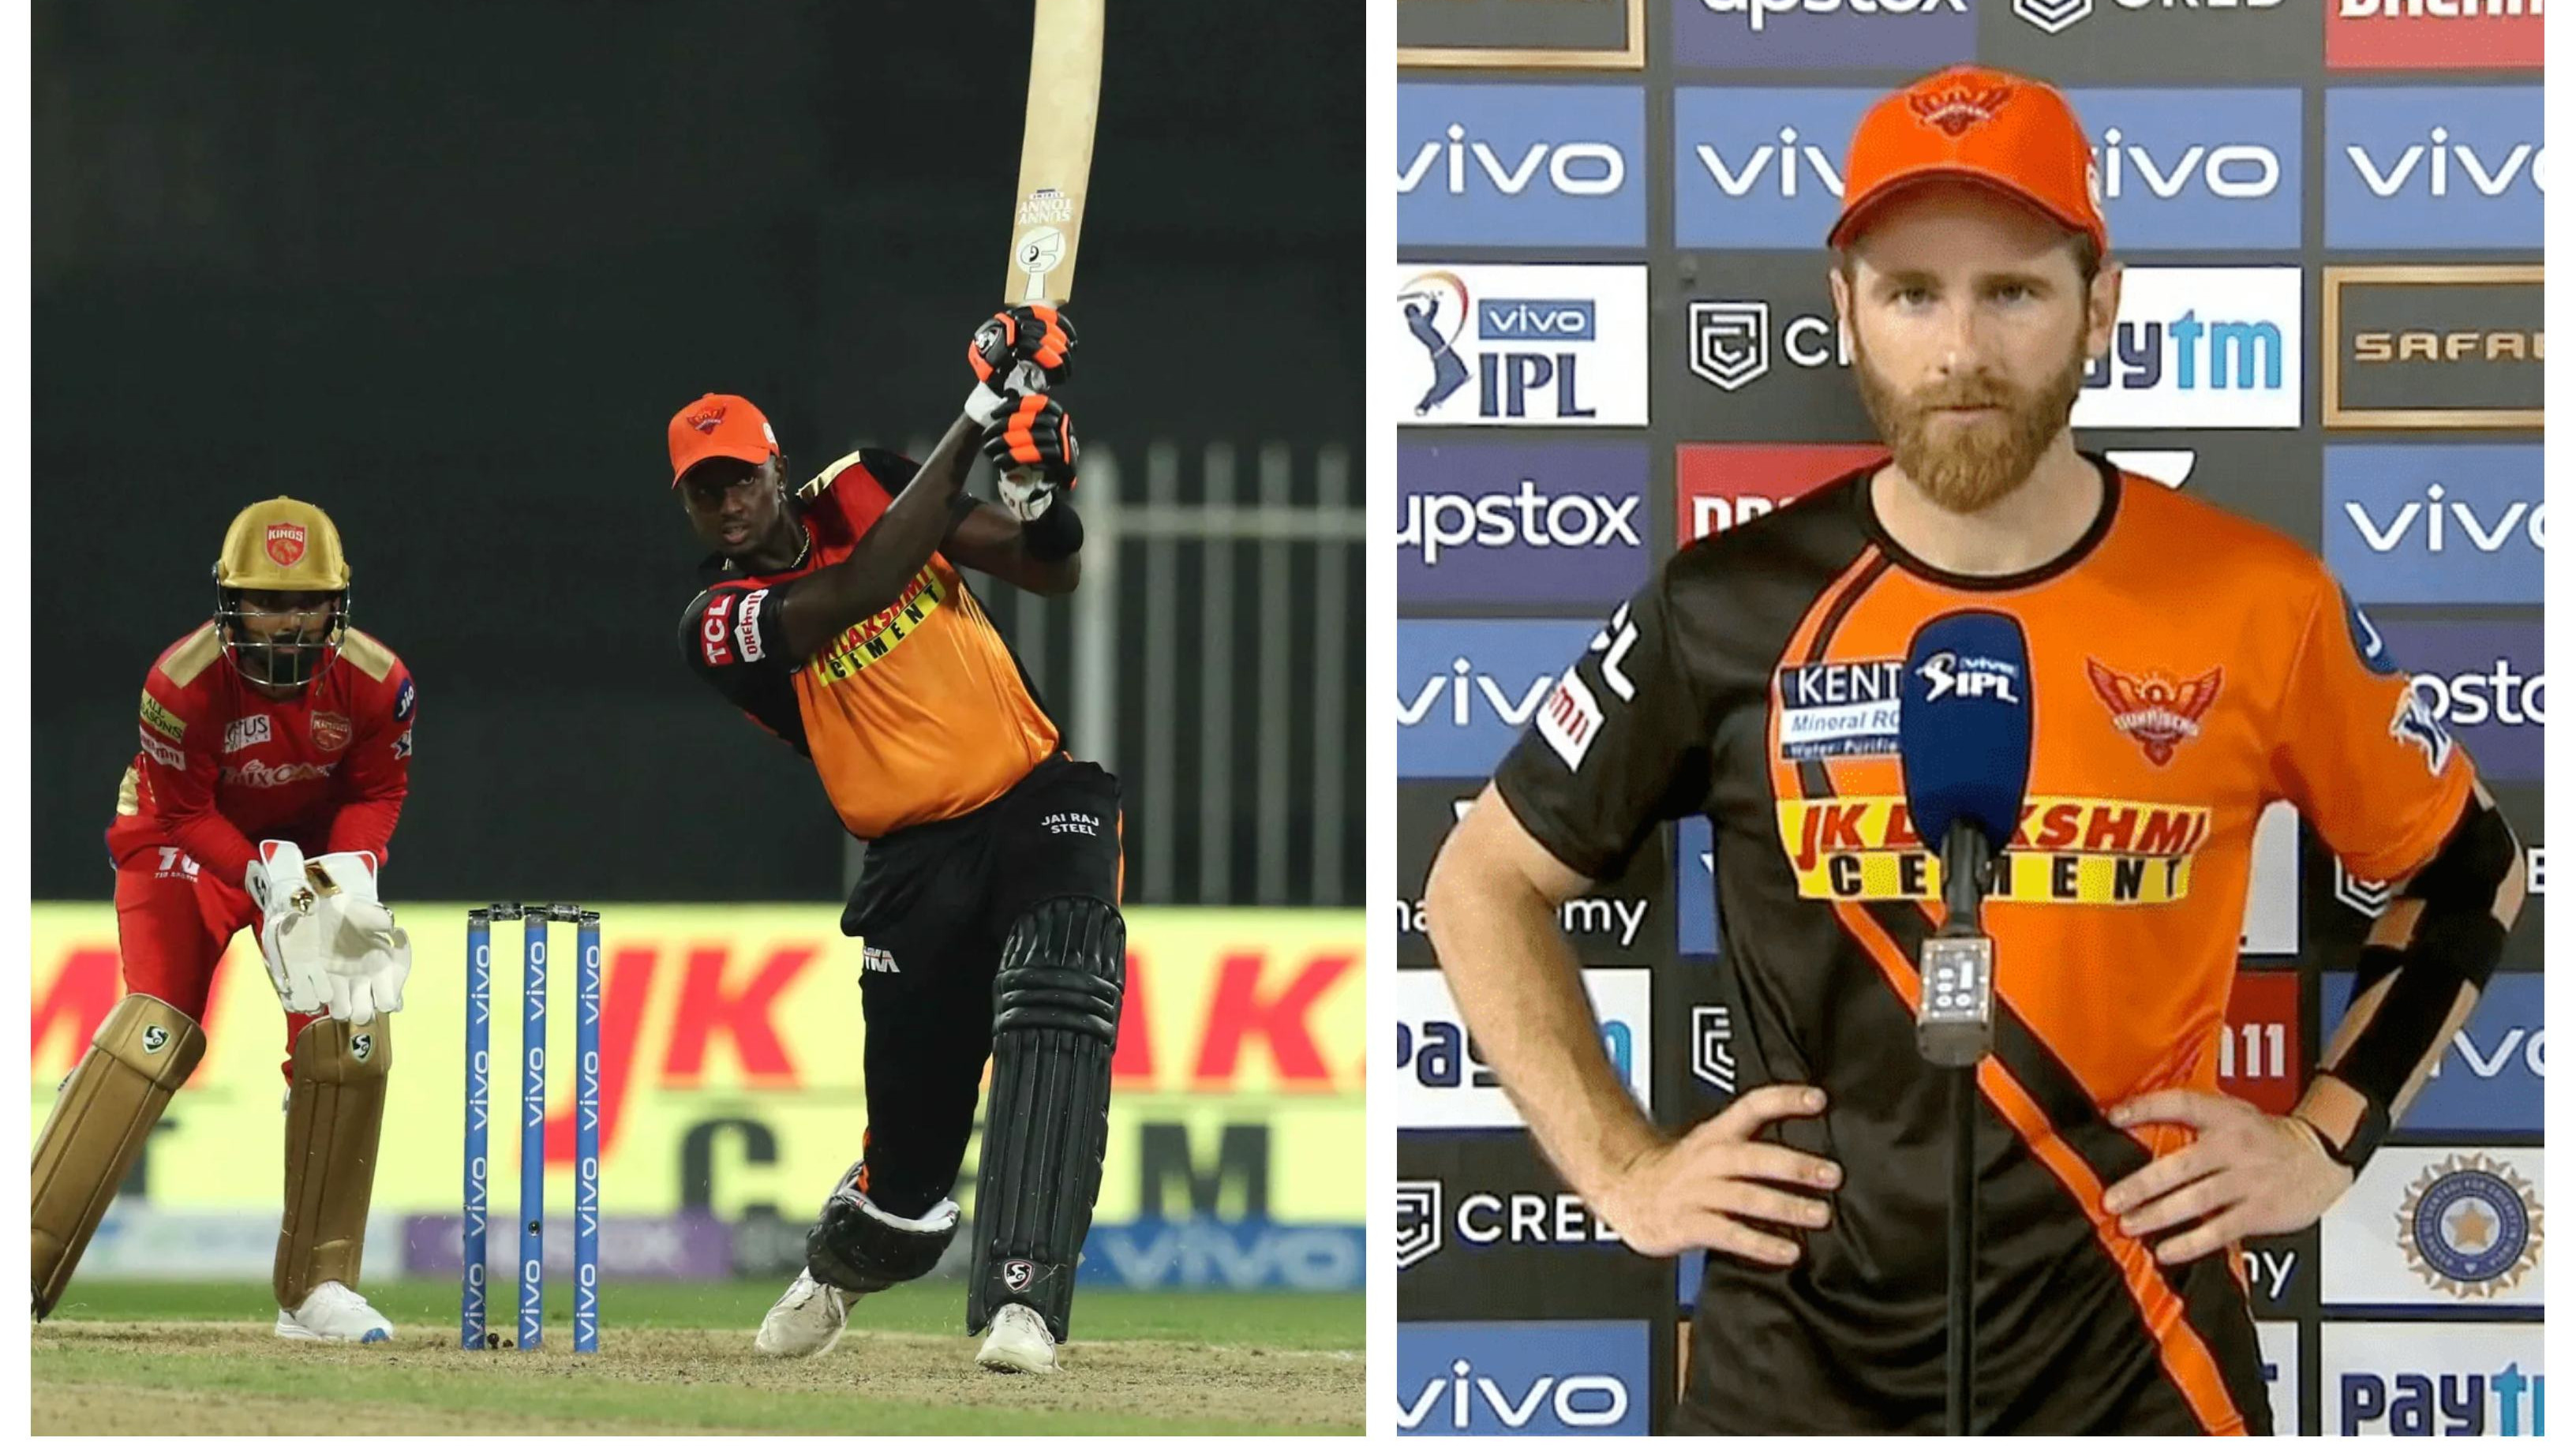 IPL 2021: Holder’s all-round brilliance kept the match competitive, Williamson after SRH’s loss to PBKS